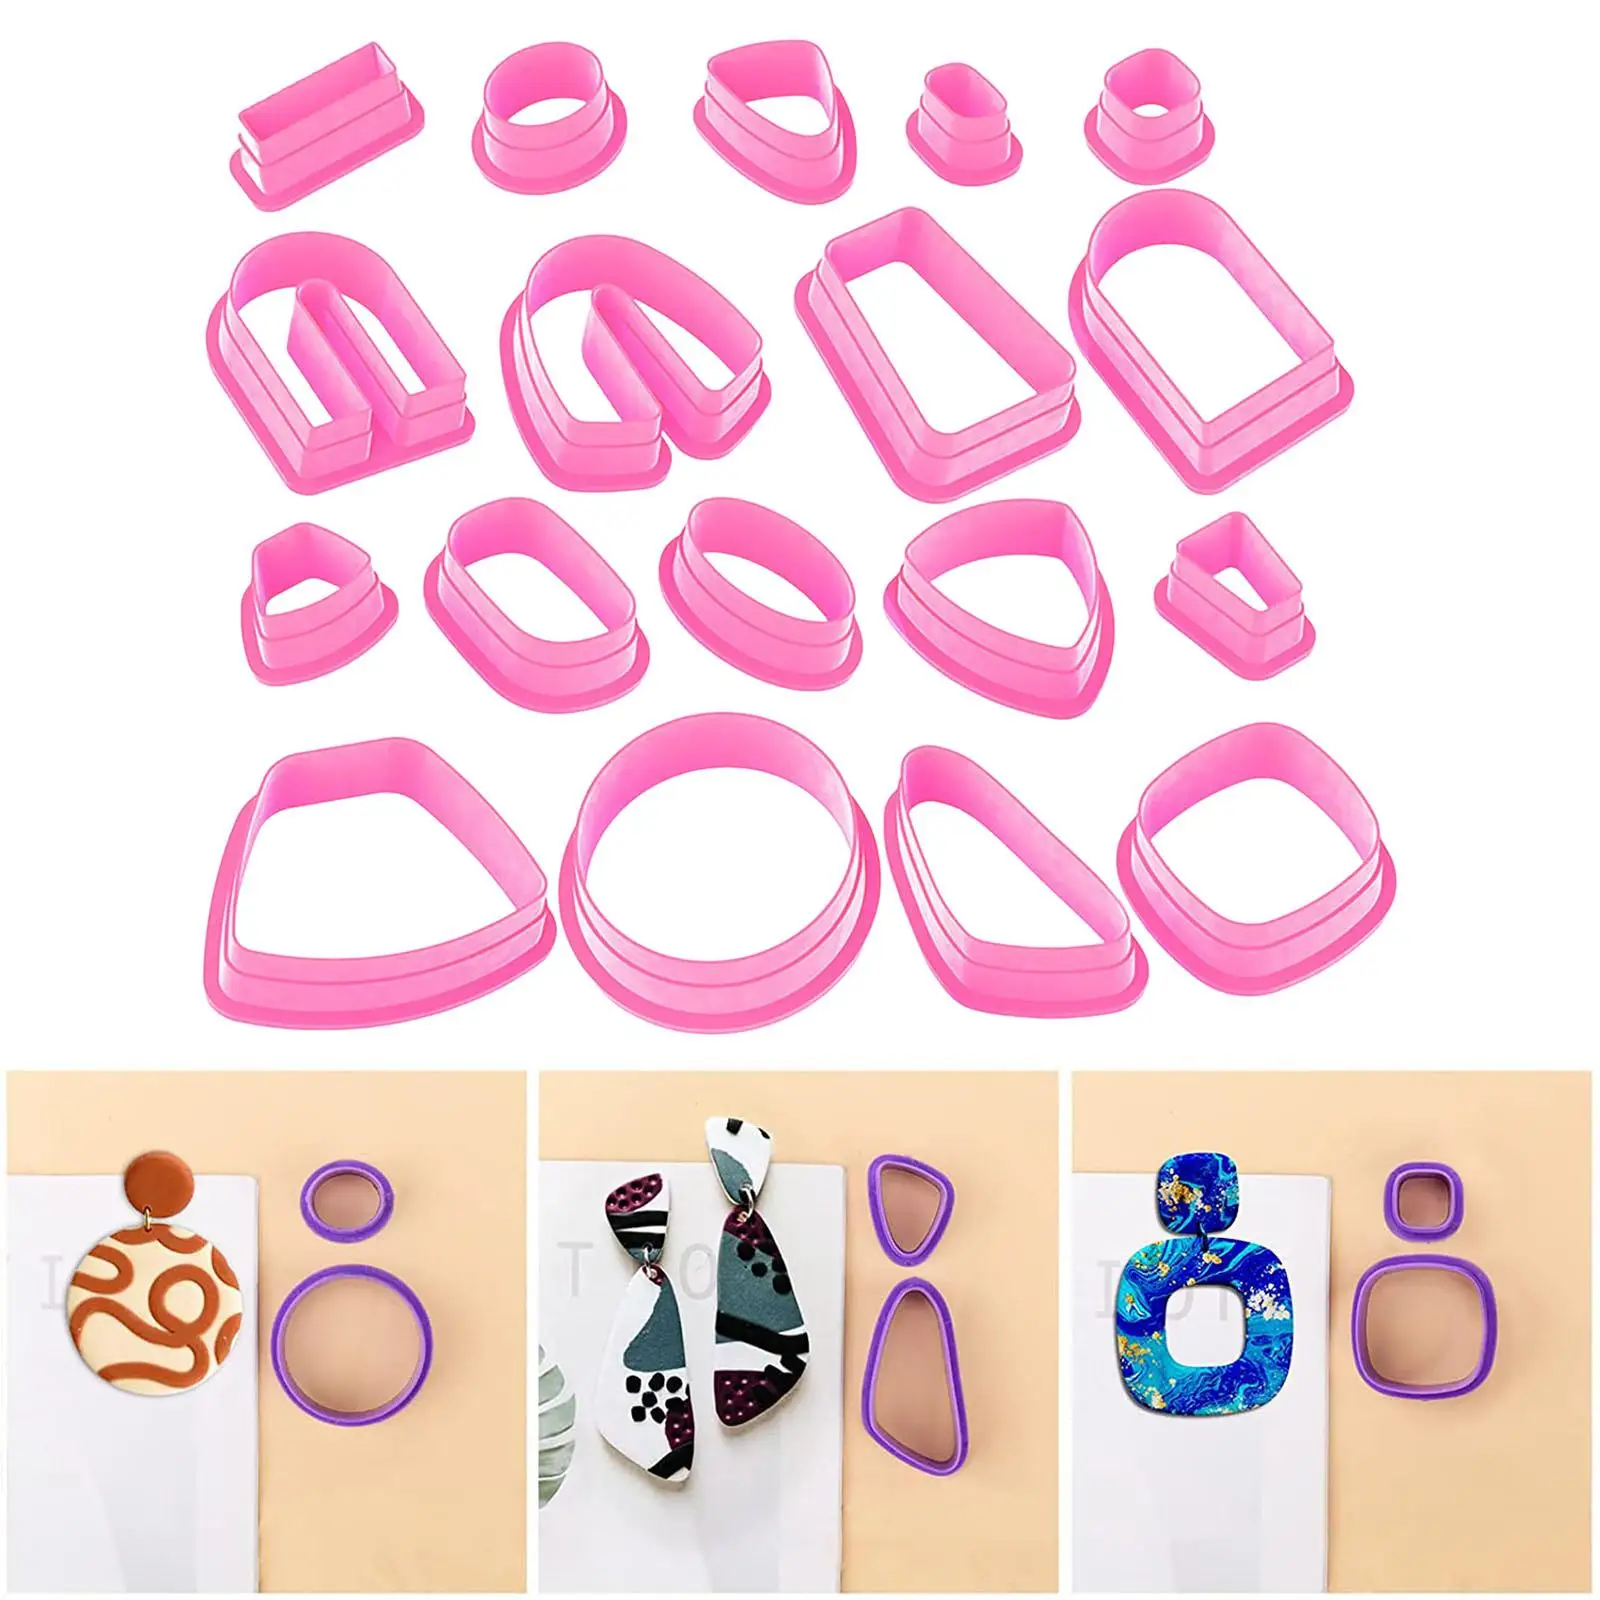 18 Pieces Polymer Clay Cutters Earrings Crafts Kids Polymer Clay Jewelry Clay Tools